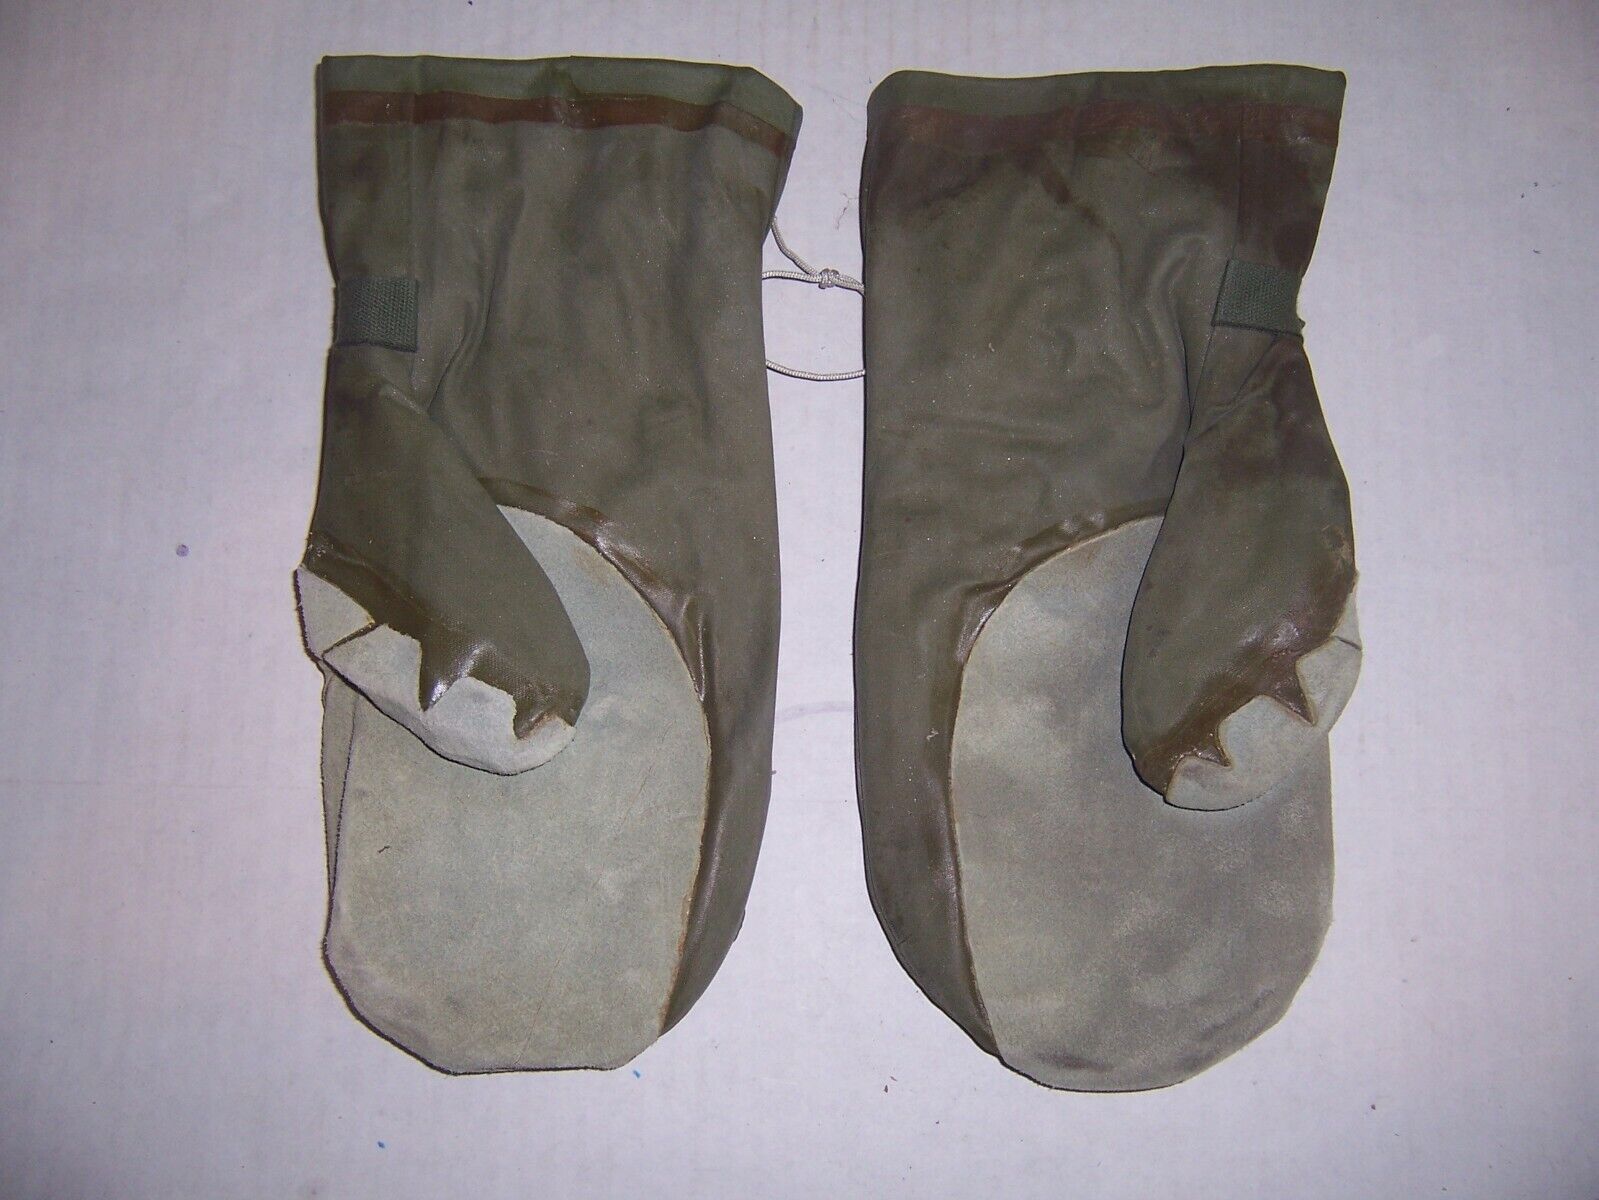 Original US Army Extreme Cold weather Gloves Mittens Waterproof Impermeable MED 